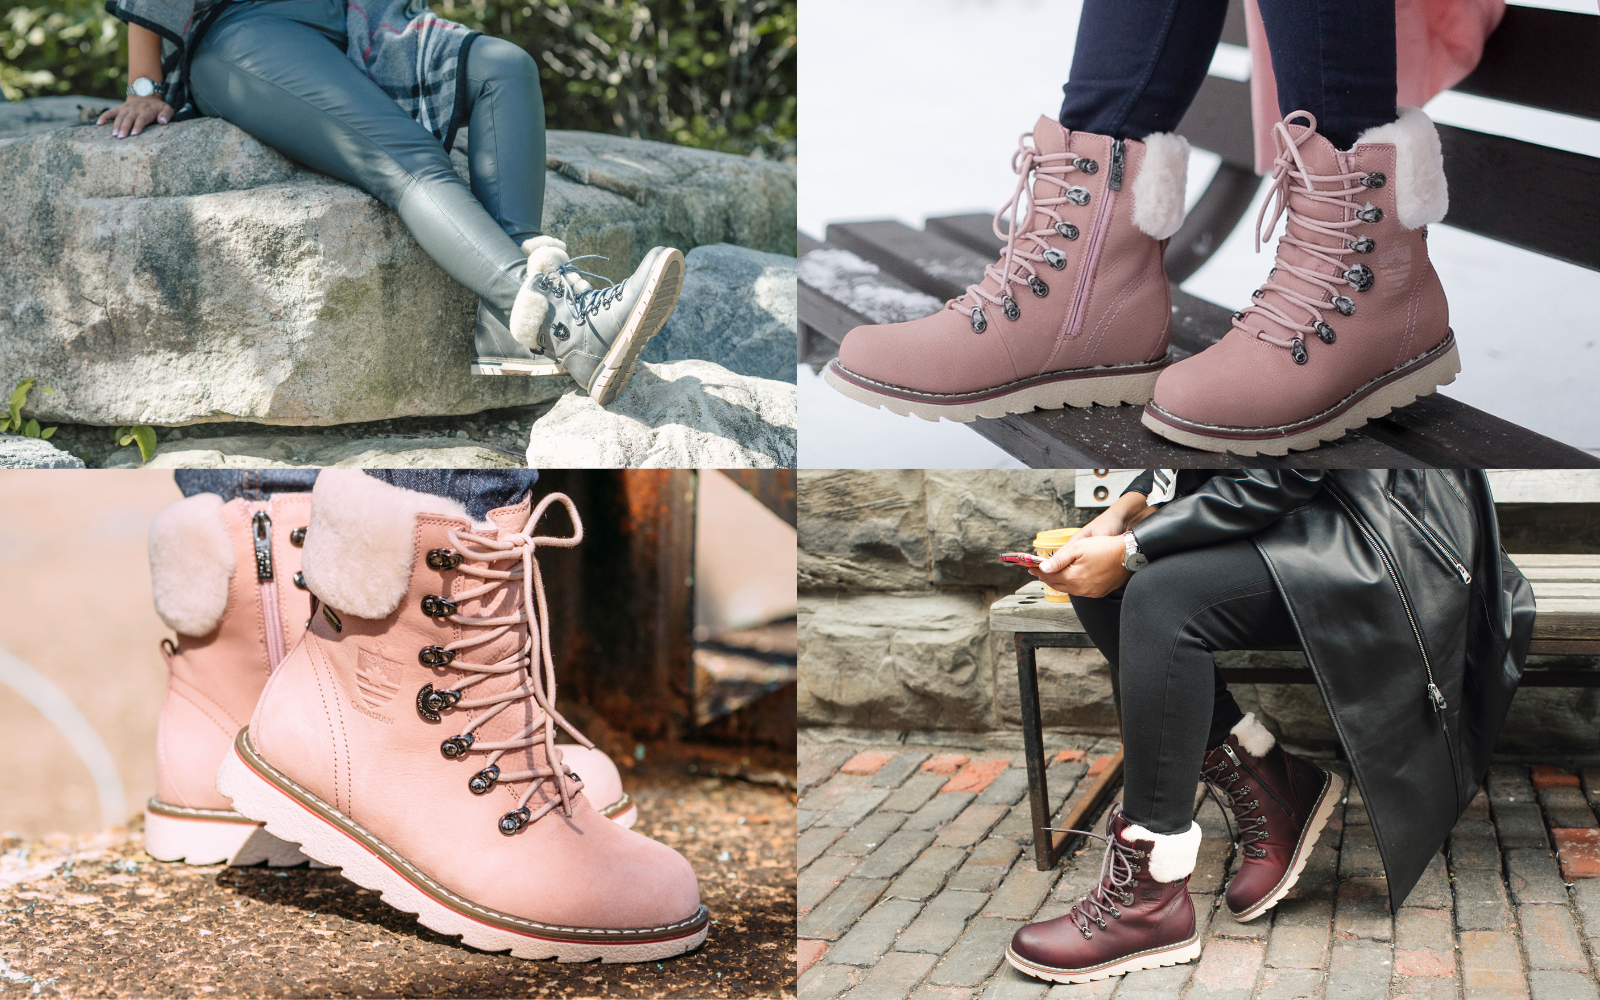 A high-quality, stylish waterproof boot is prominently featured, depicting its capabilities in a balanced environment.